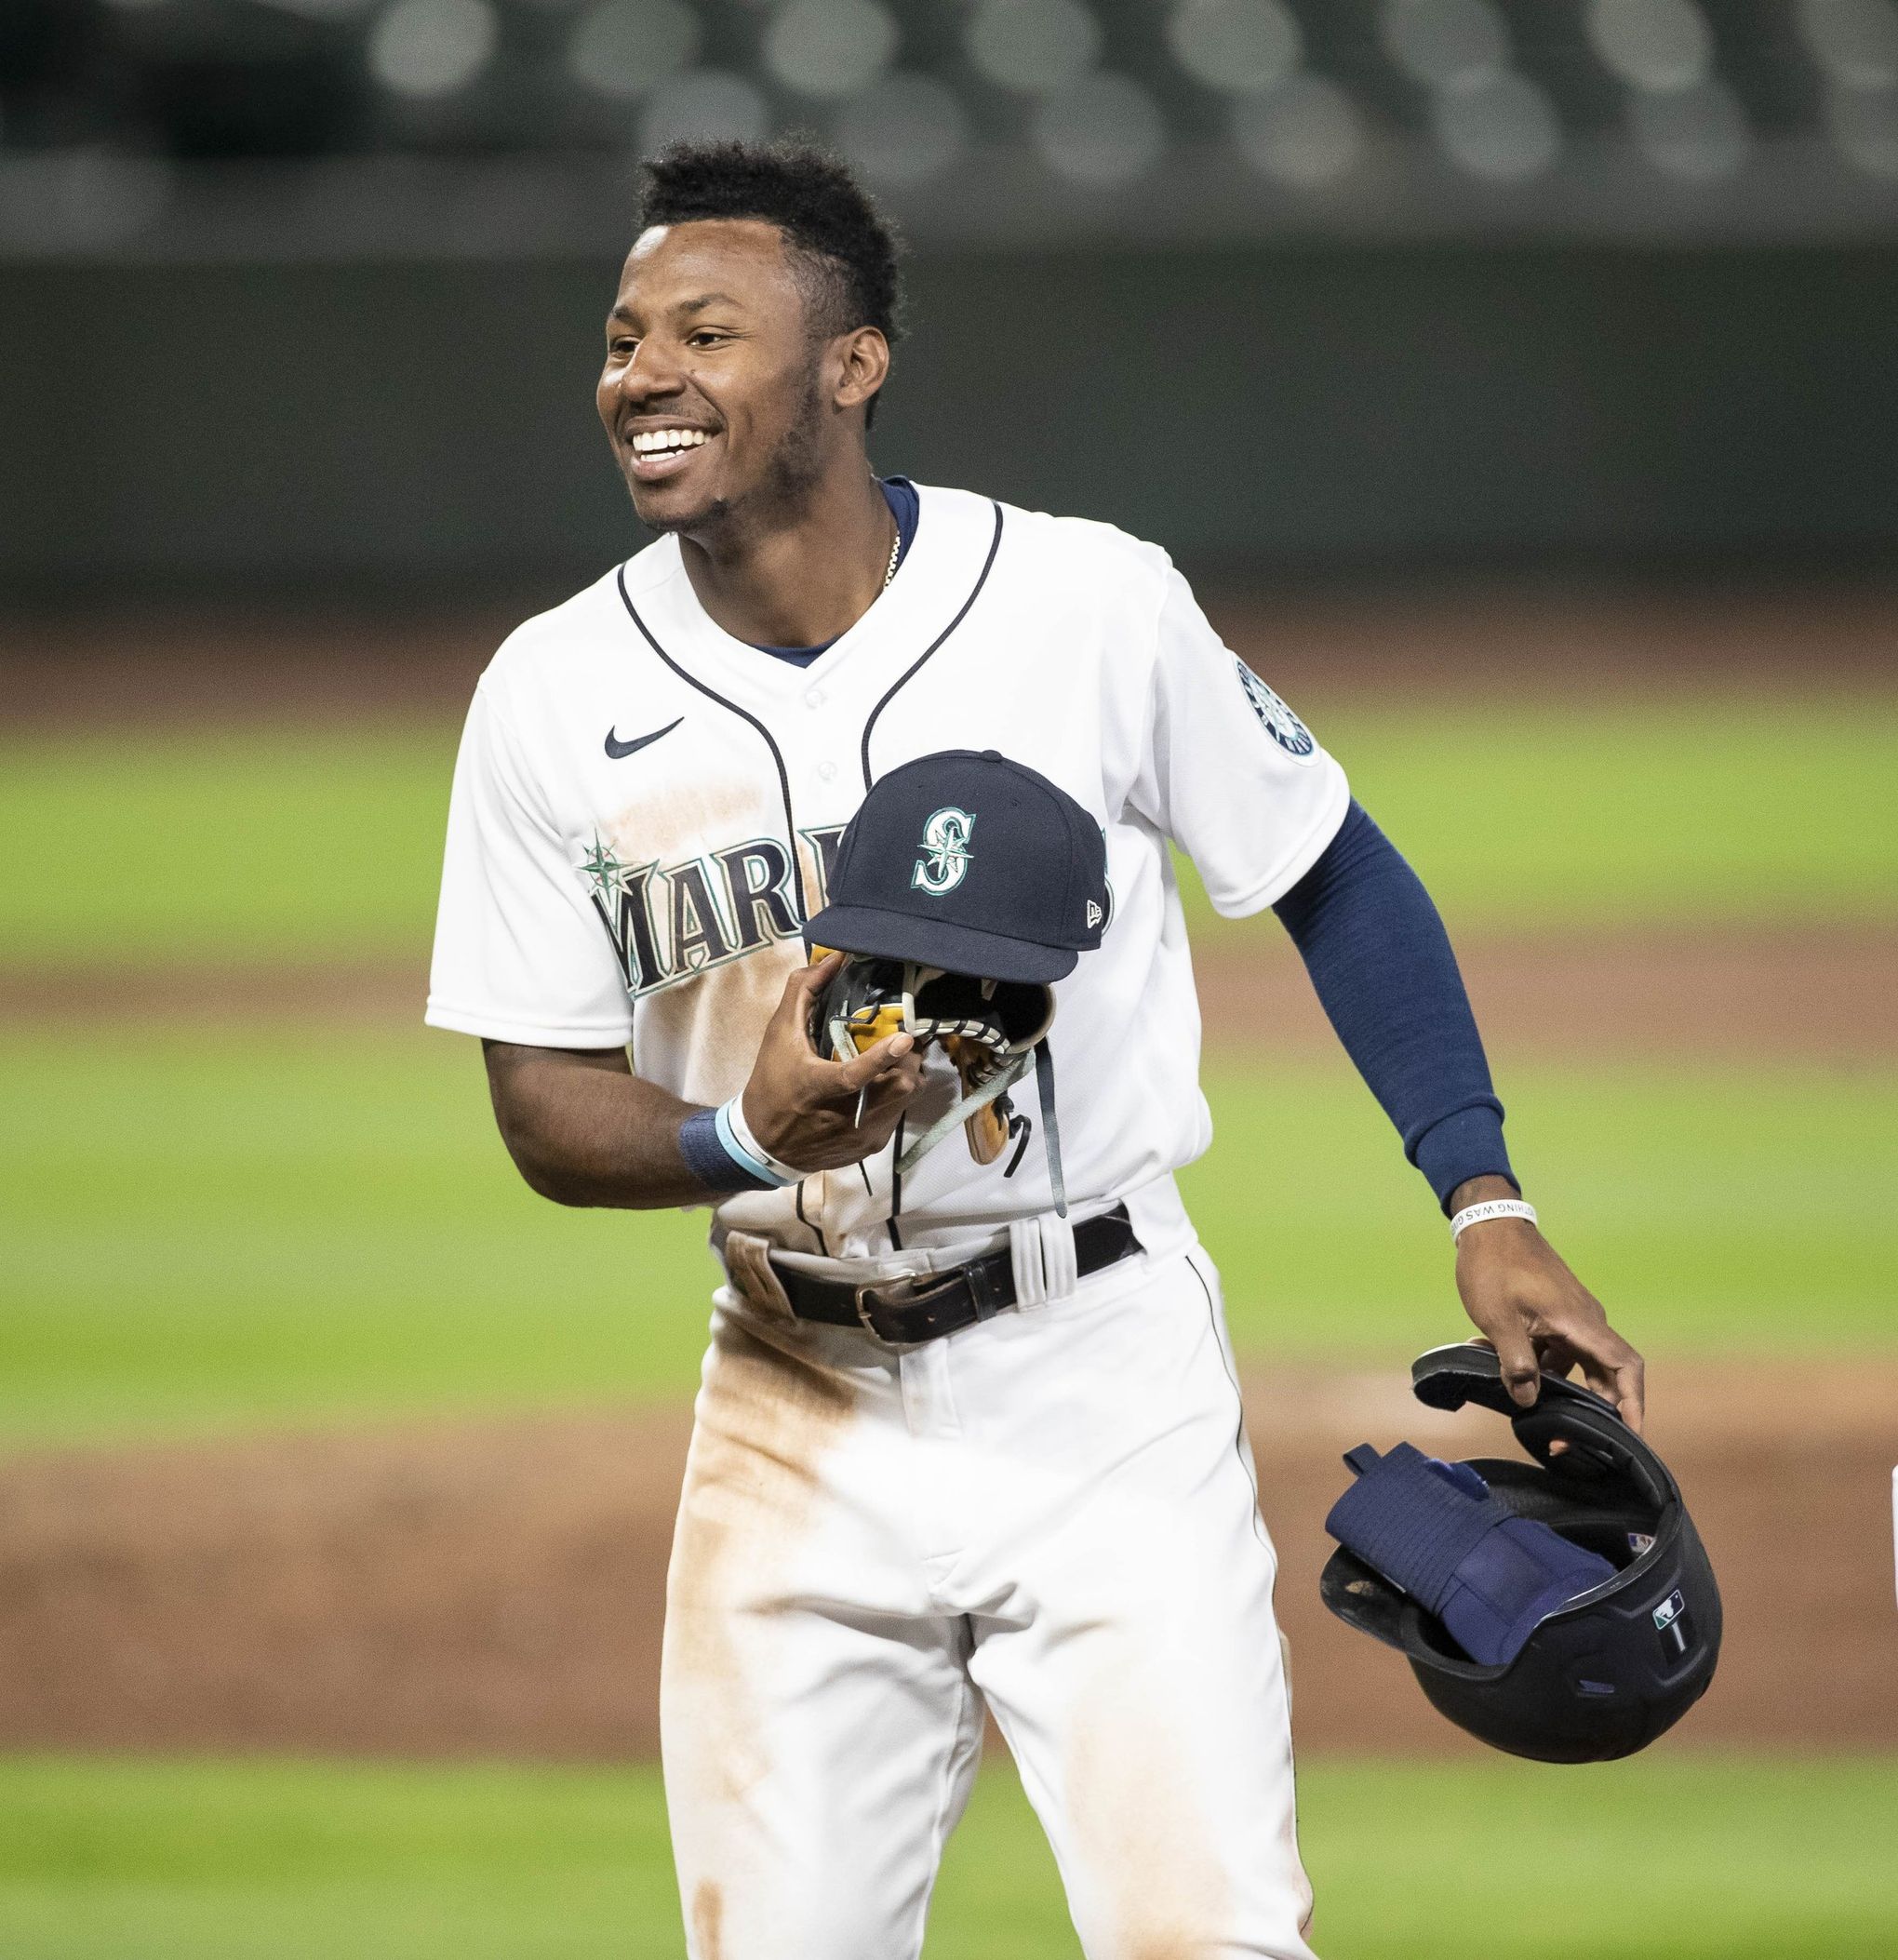 Mariners' Lewis named AL Outstanding Rookie by MLB players